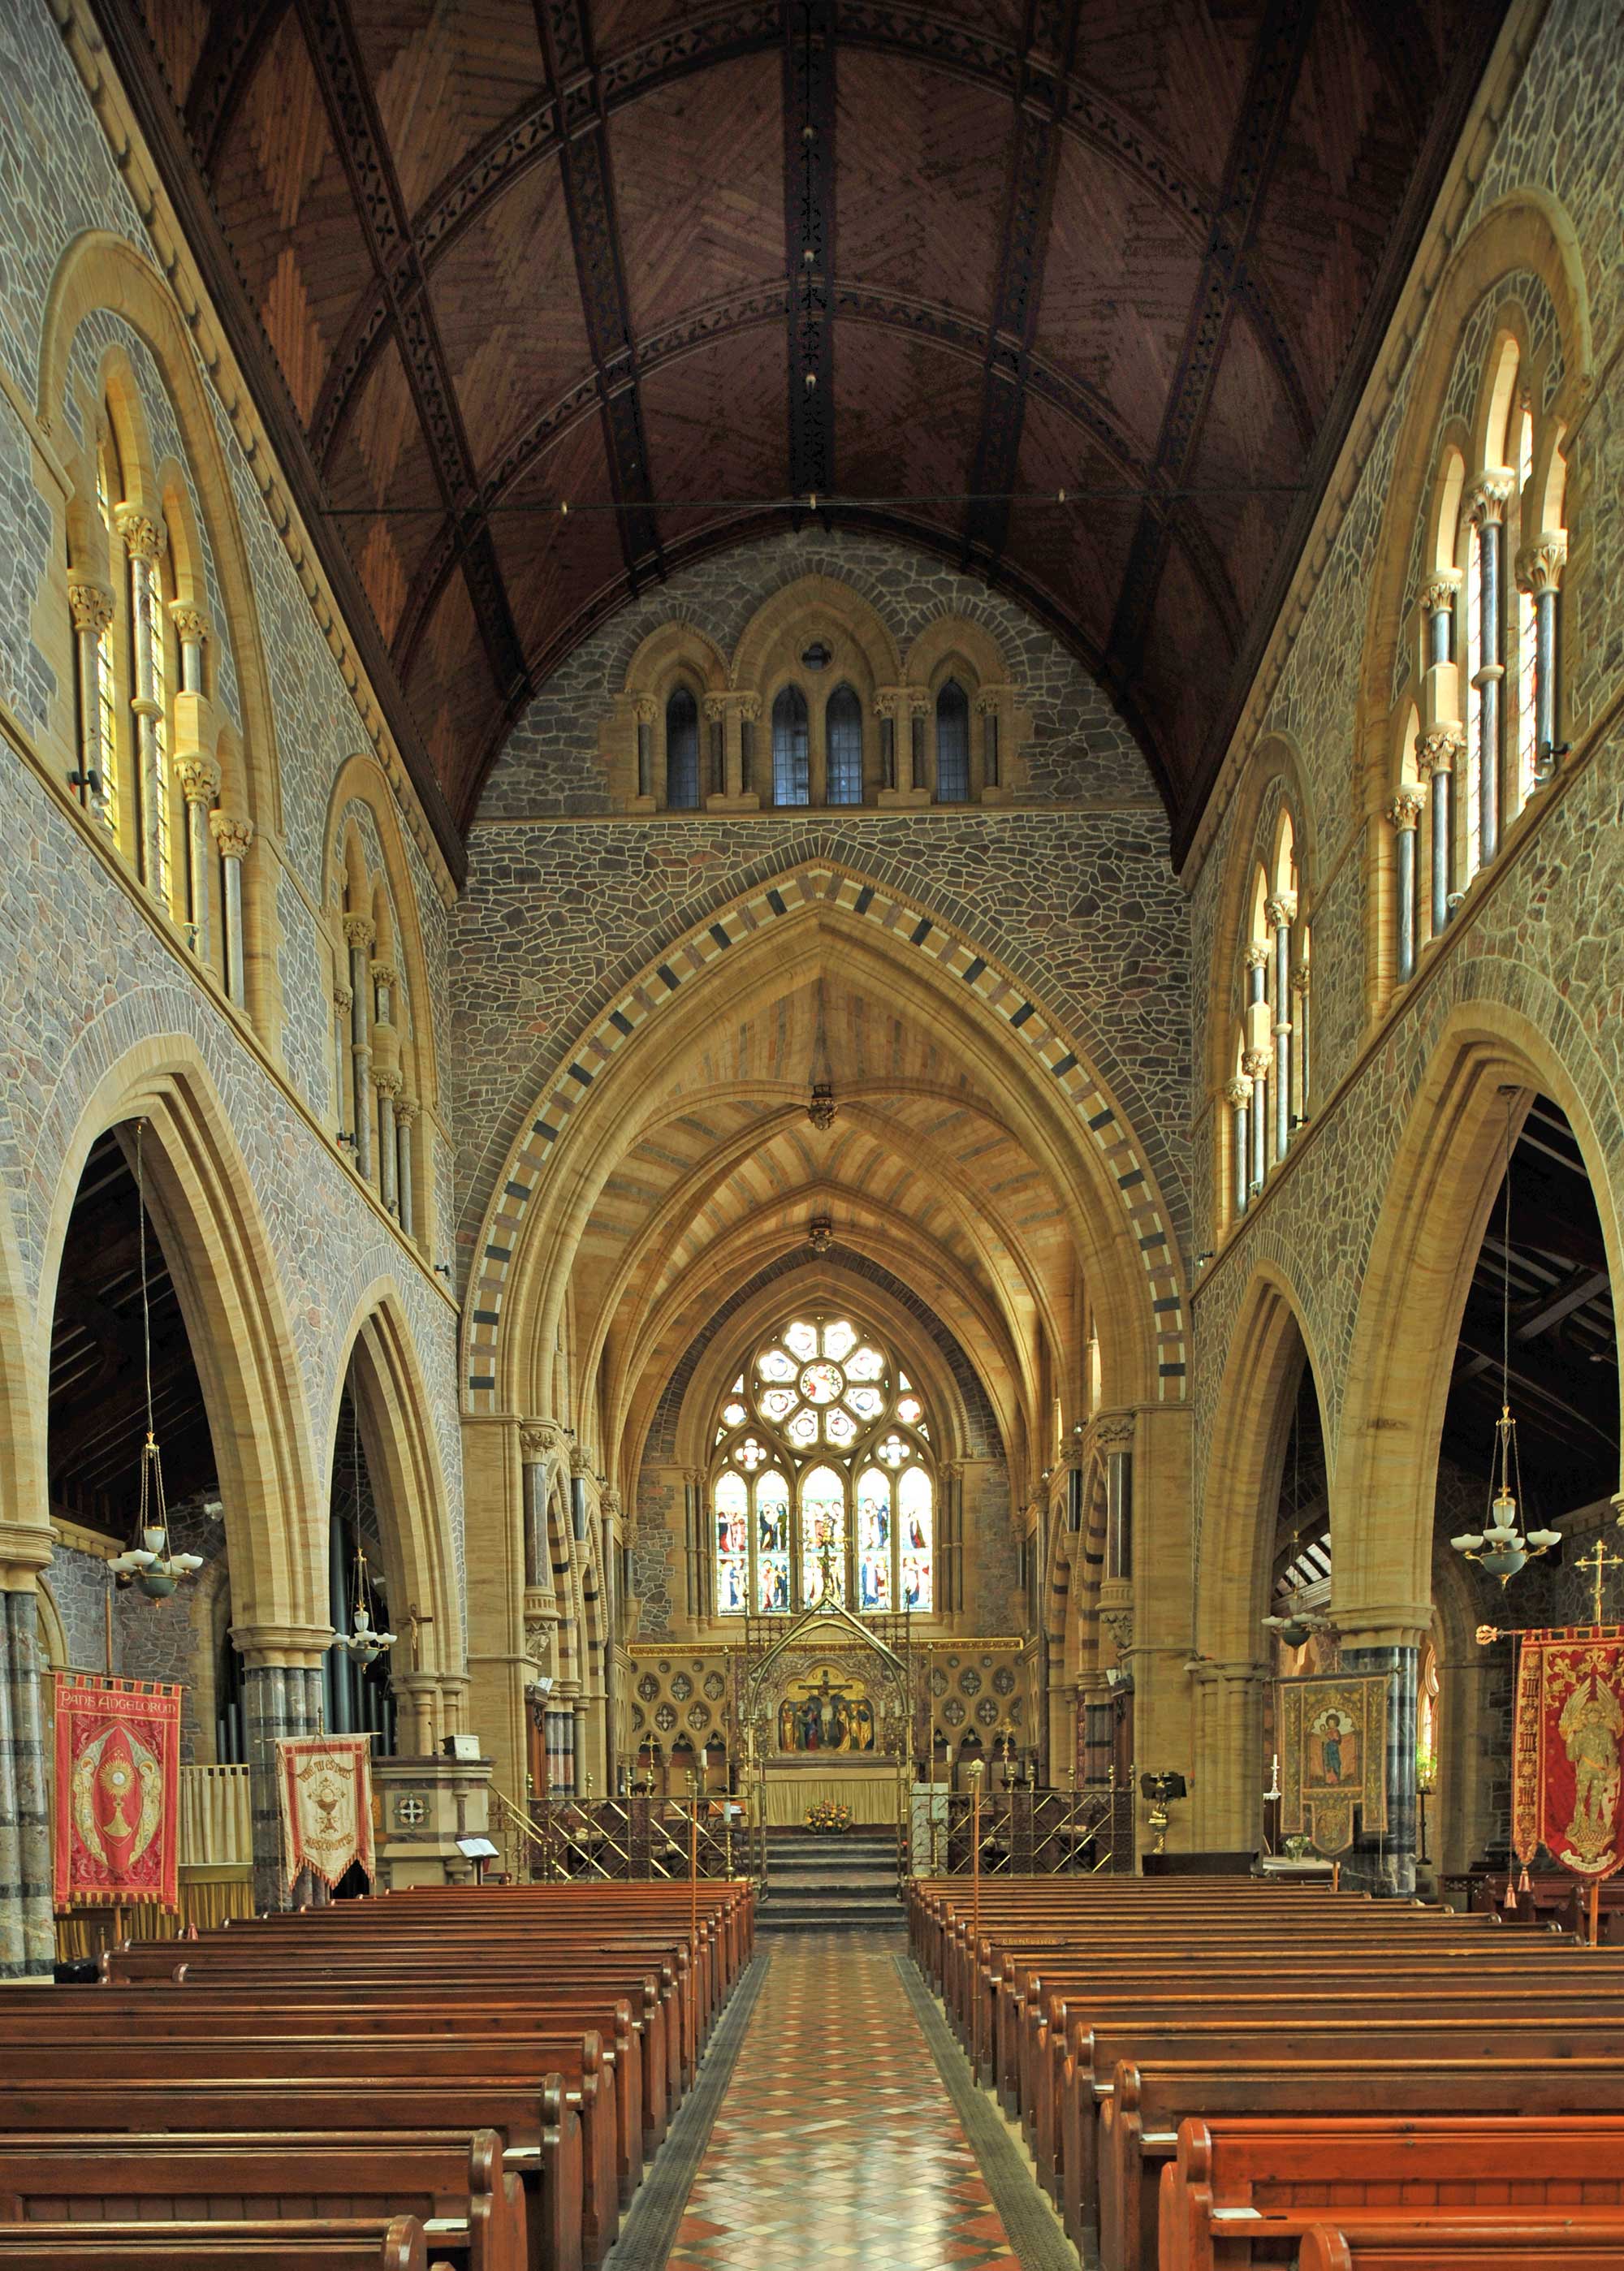 View looking towards the altar. The walls are composed of stone giving a mosaic effect.